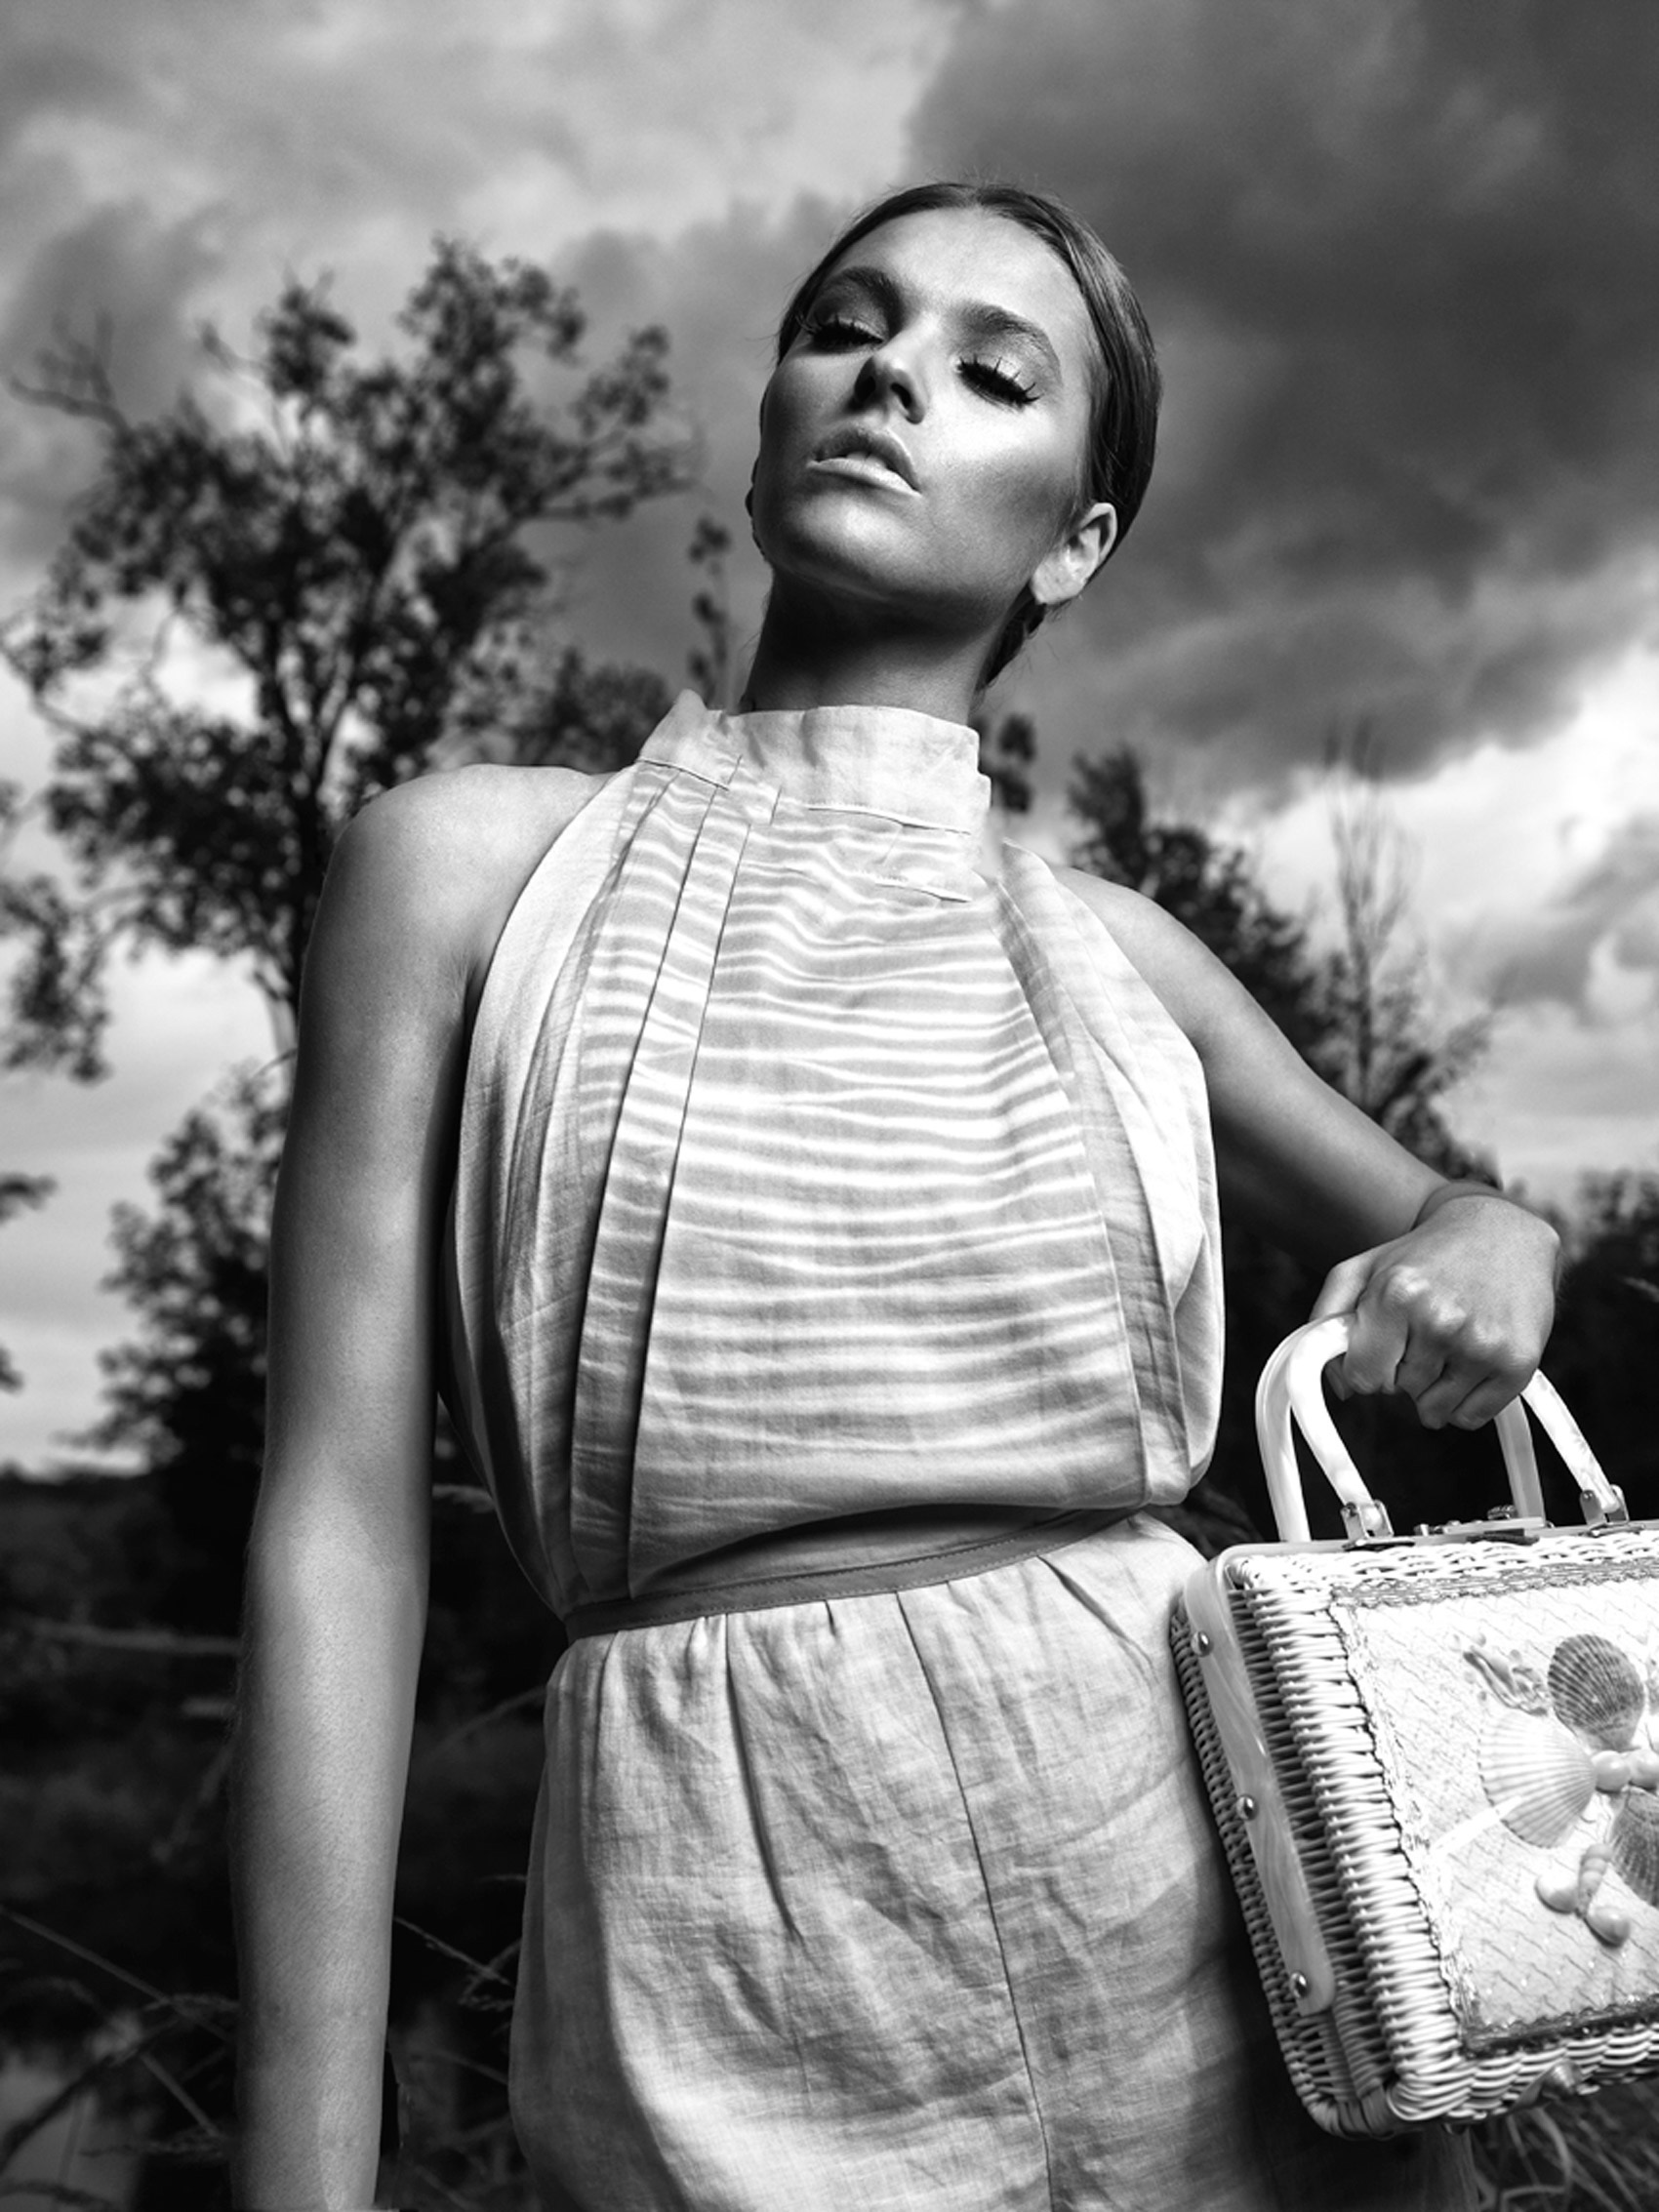 CASTAWAY_Model Megan In Linen Outfit Holding Purse Near Hip Framed Looking Up With Up  With Trees And Sky In Background